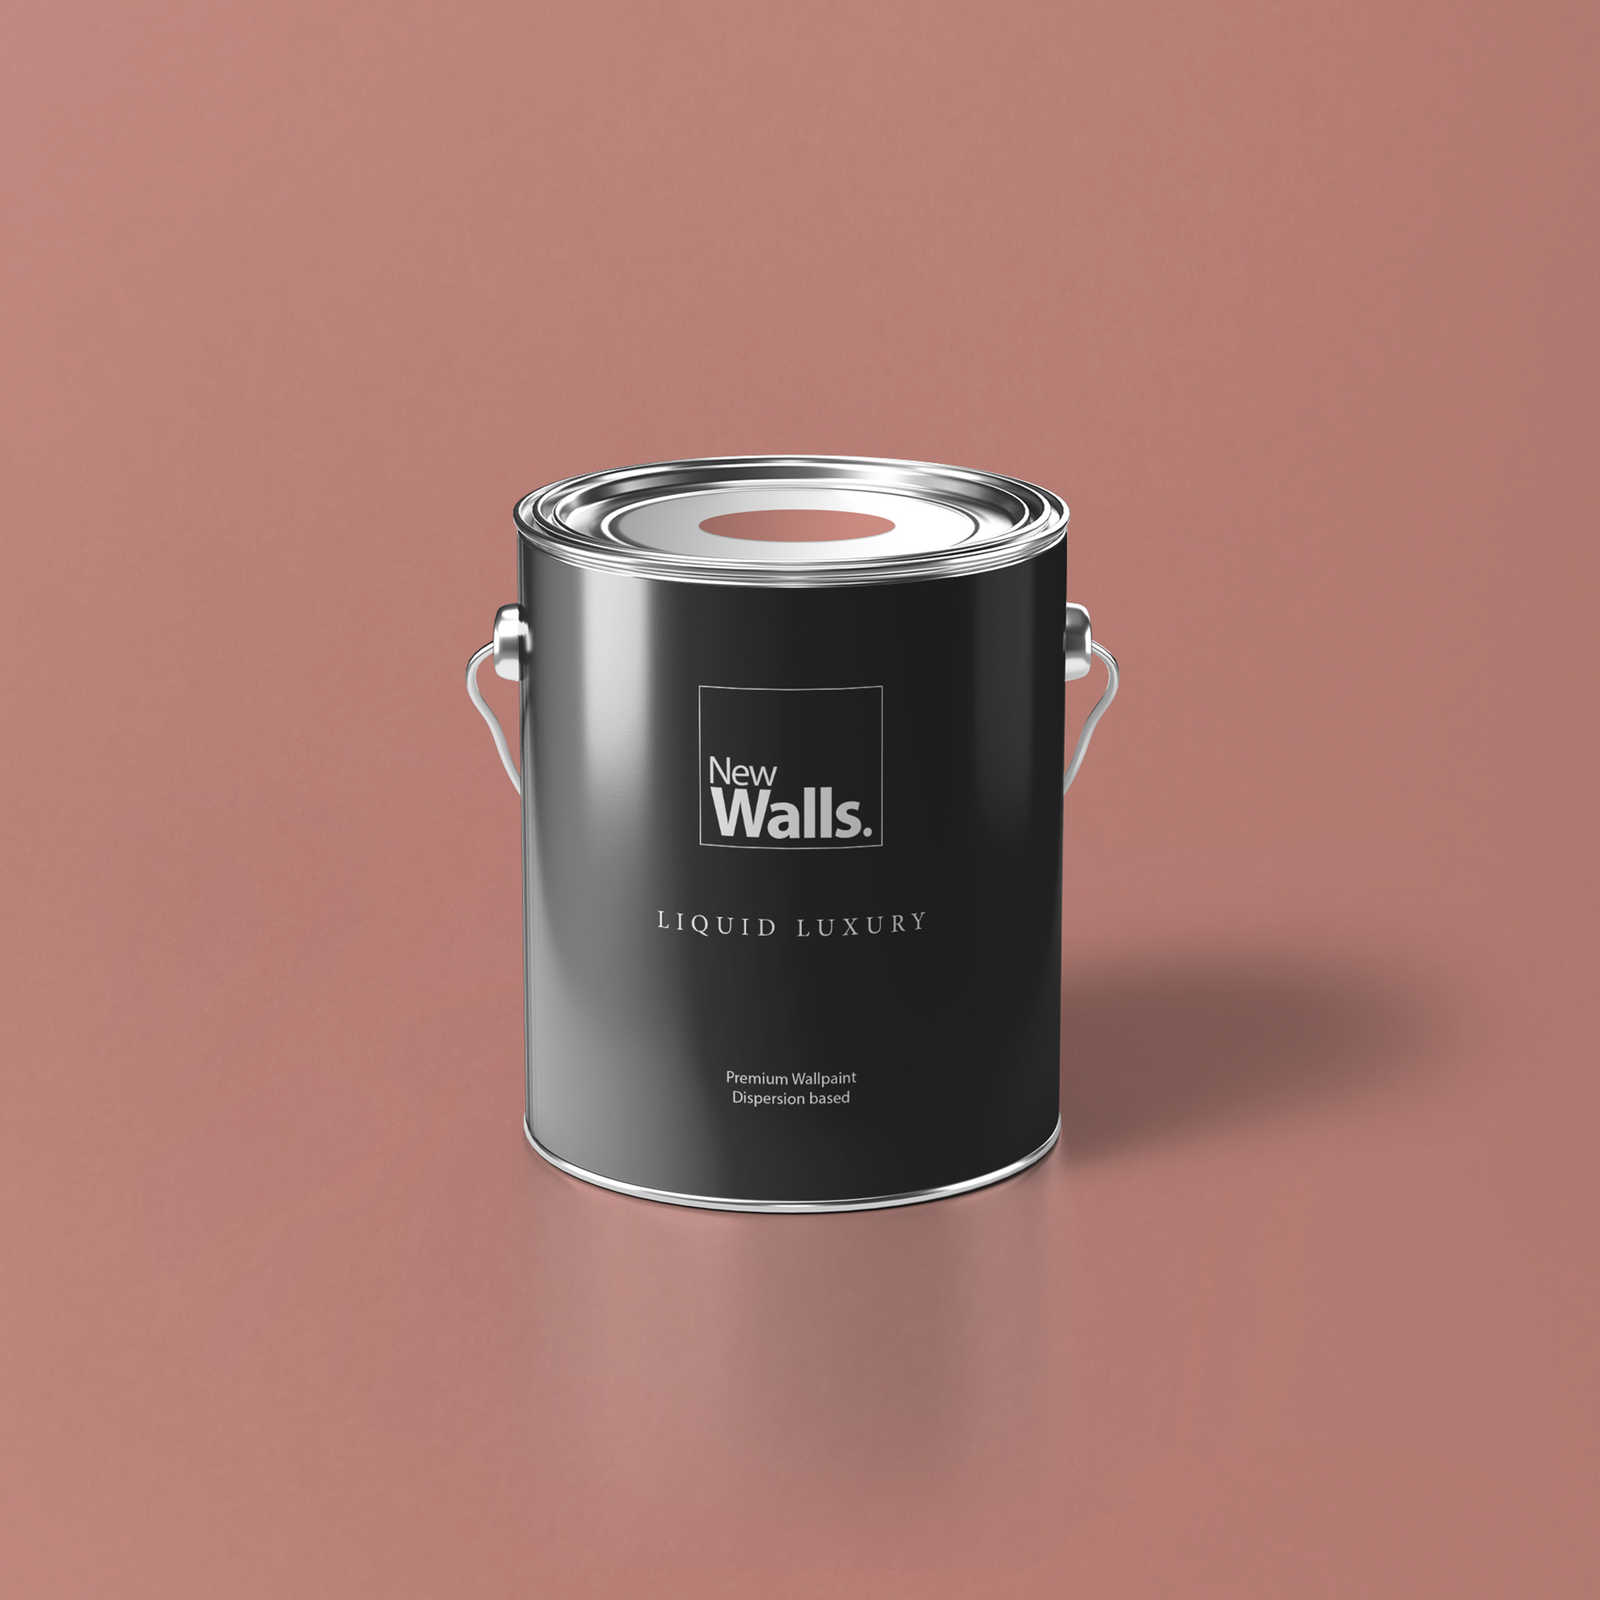 Premium Wall Paint Relaxing Salmon »Luxury Lipstick« NW1004 – 2.5 litre
